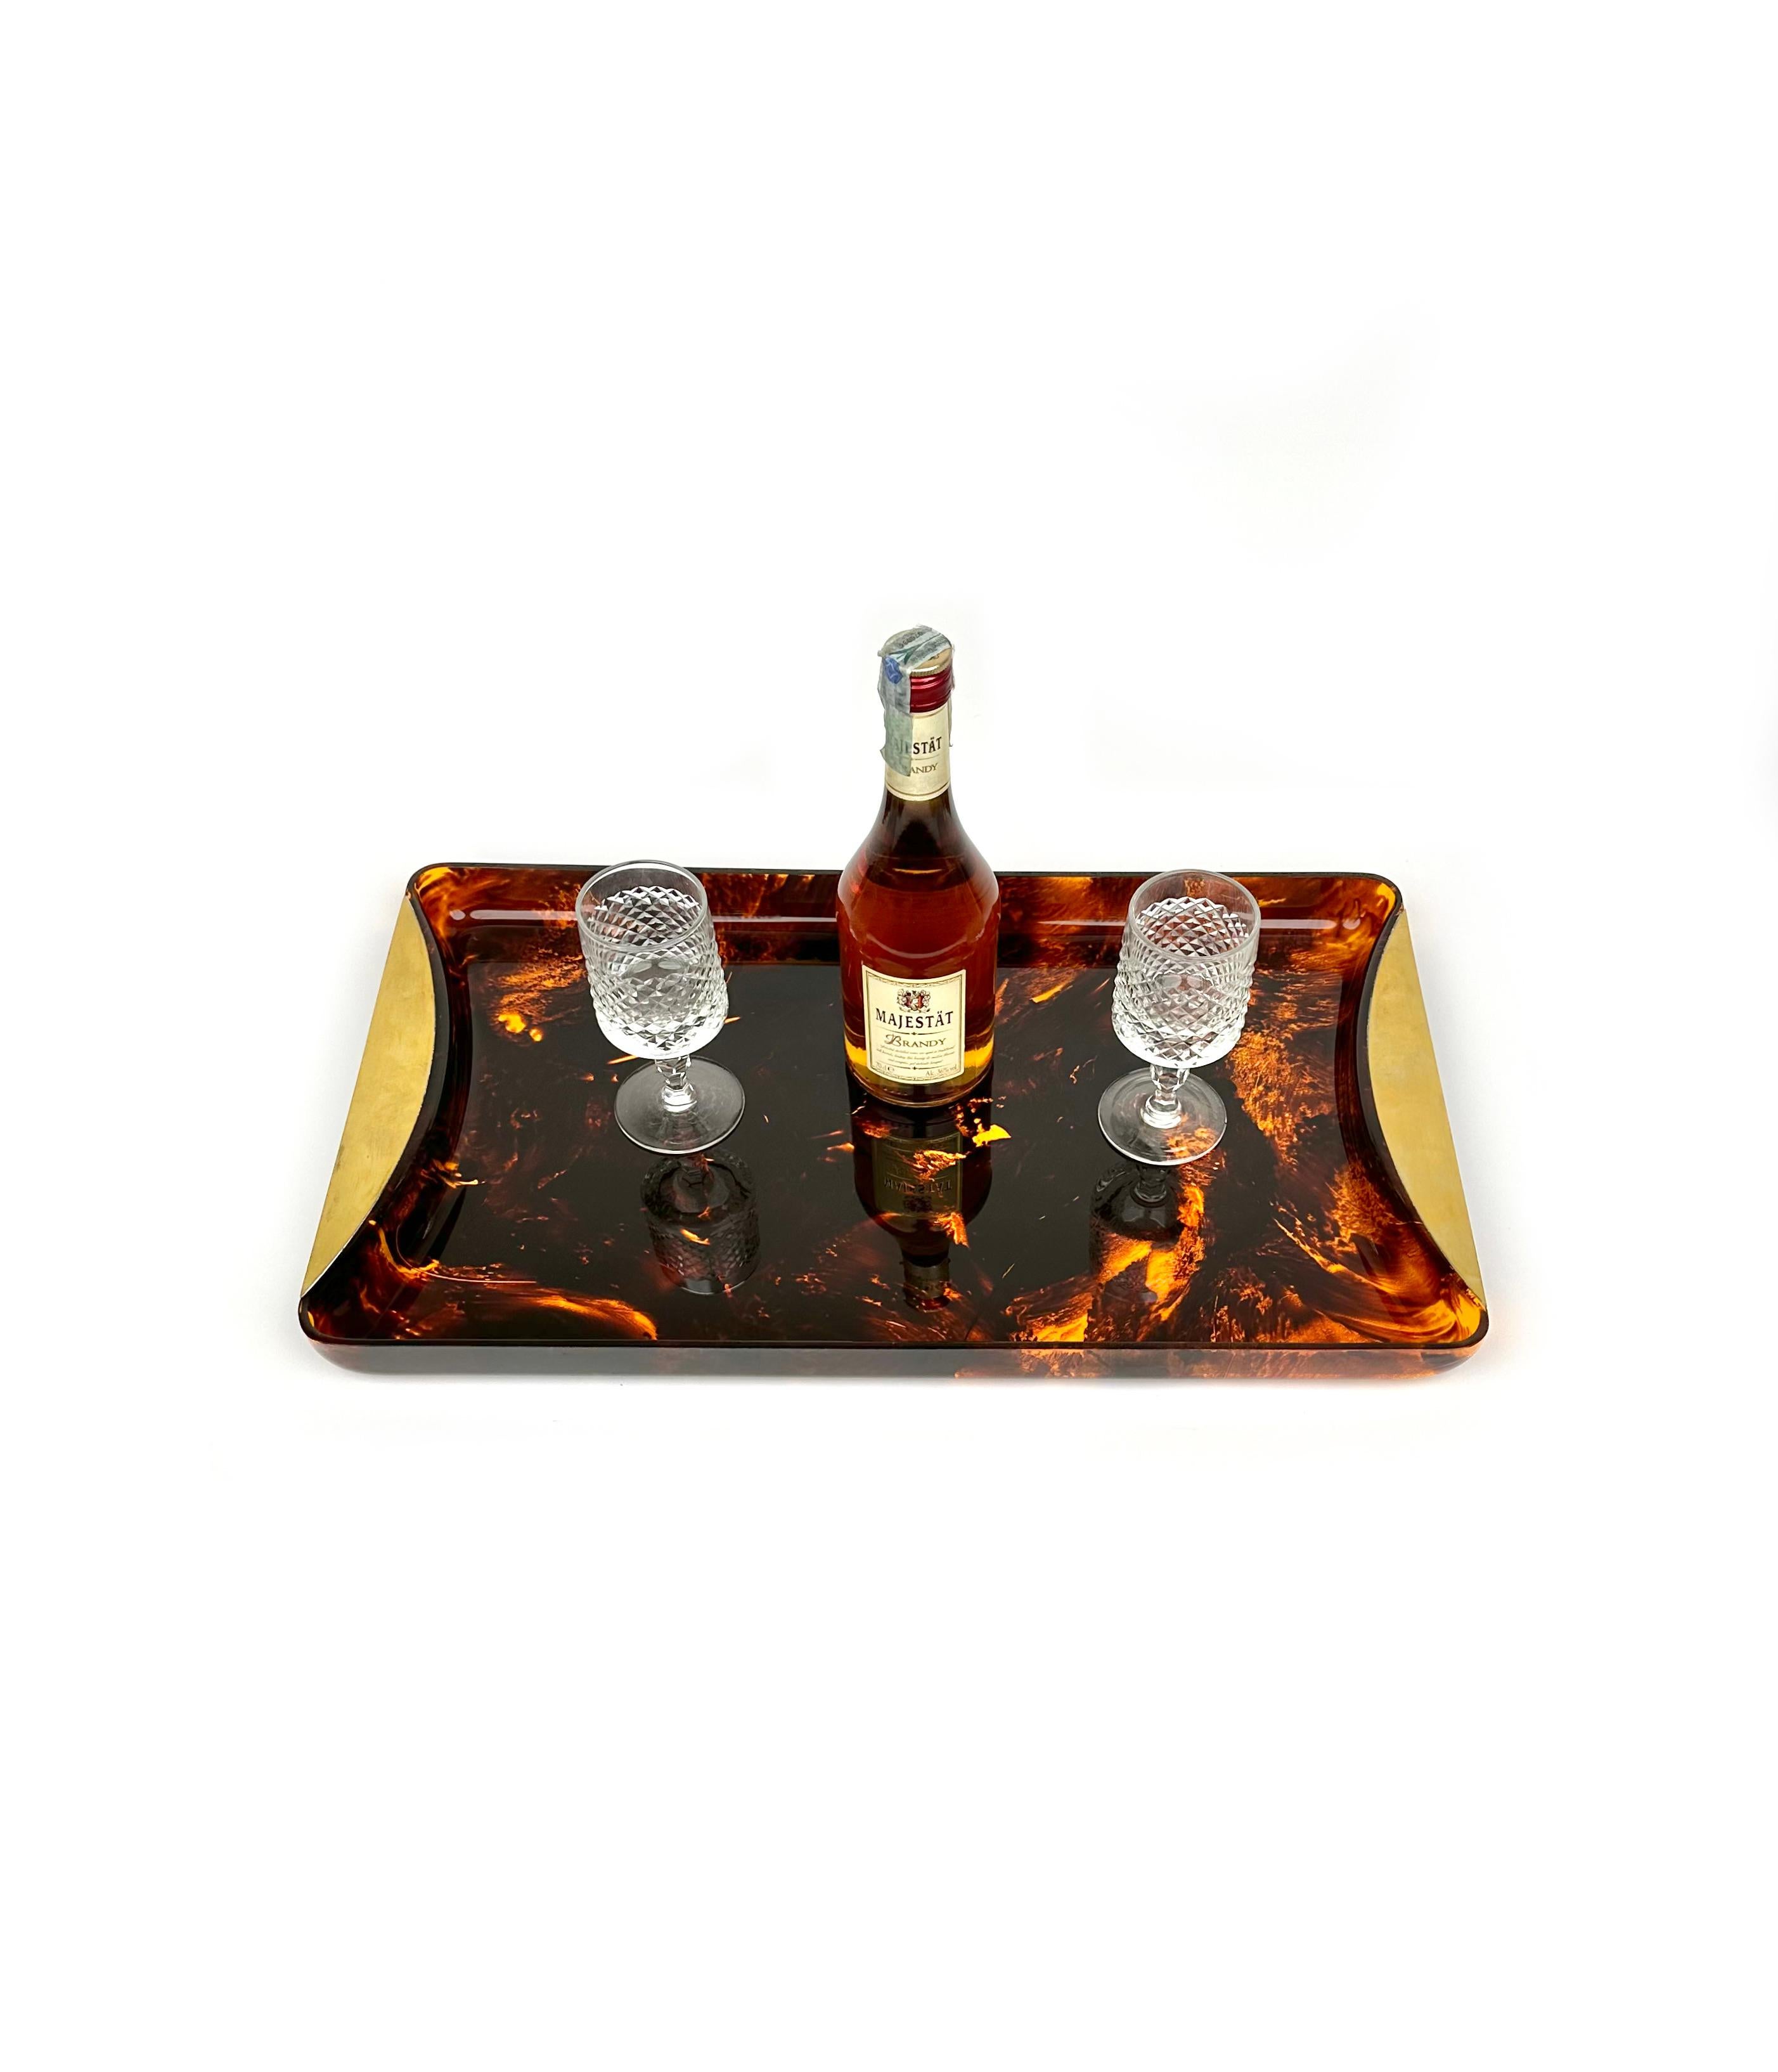 Mid-Century Tortoiseshell Lucite & Brass Serving Tray by Guzzini, Italy, 1970s For Sale 1